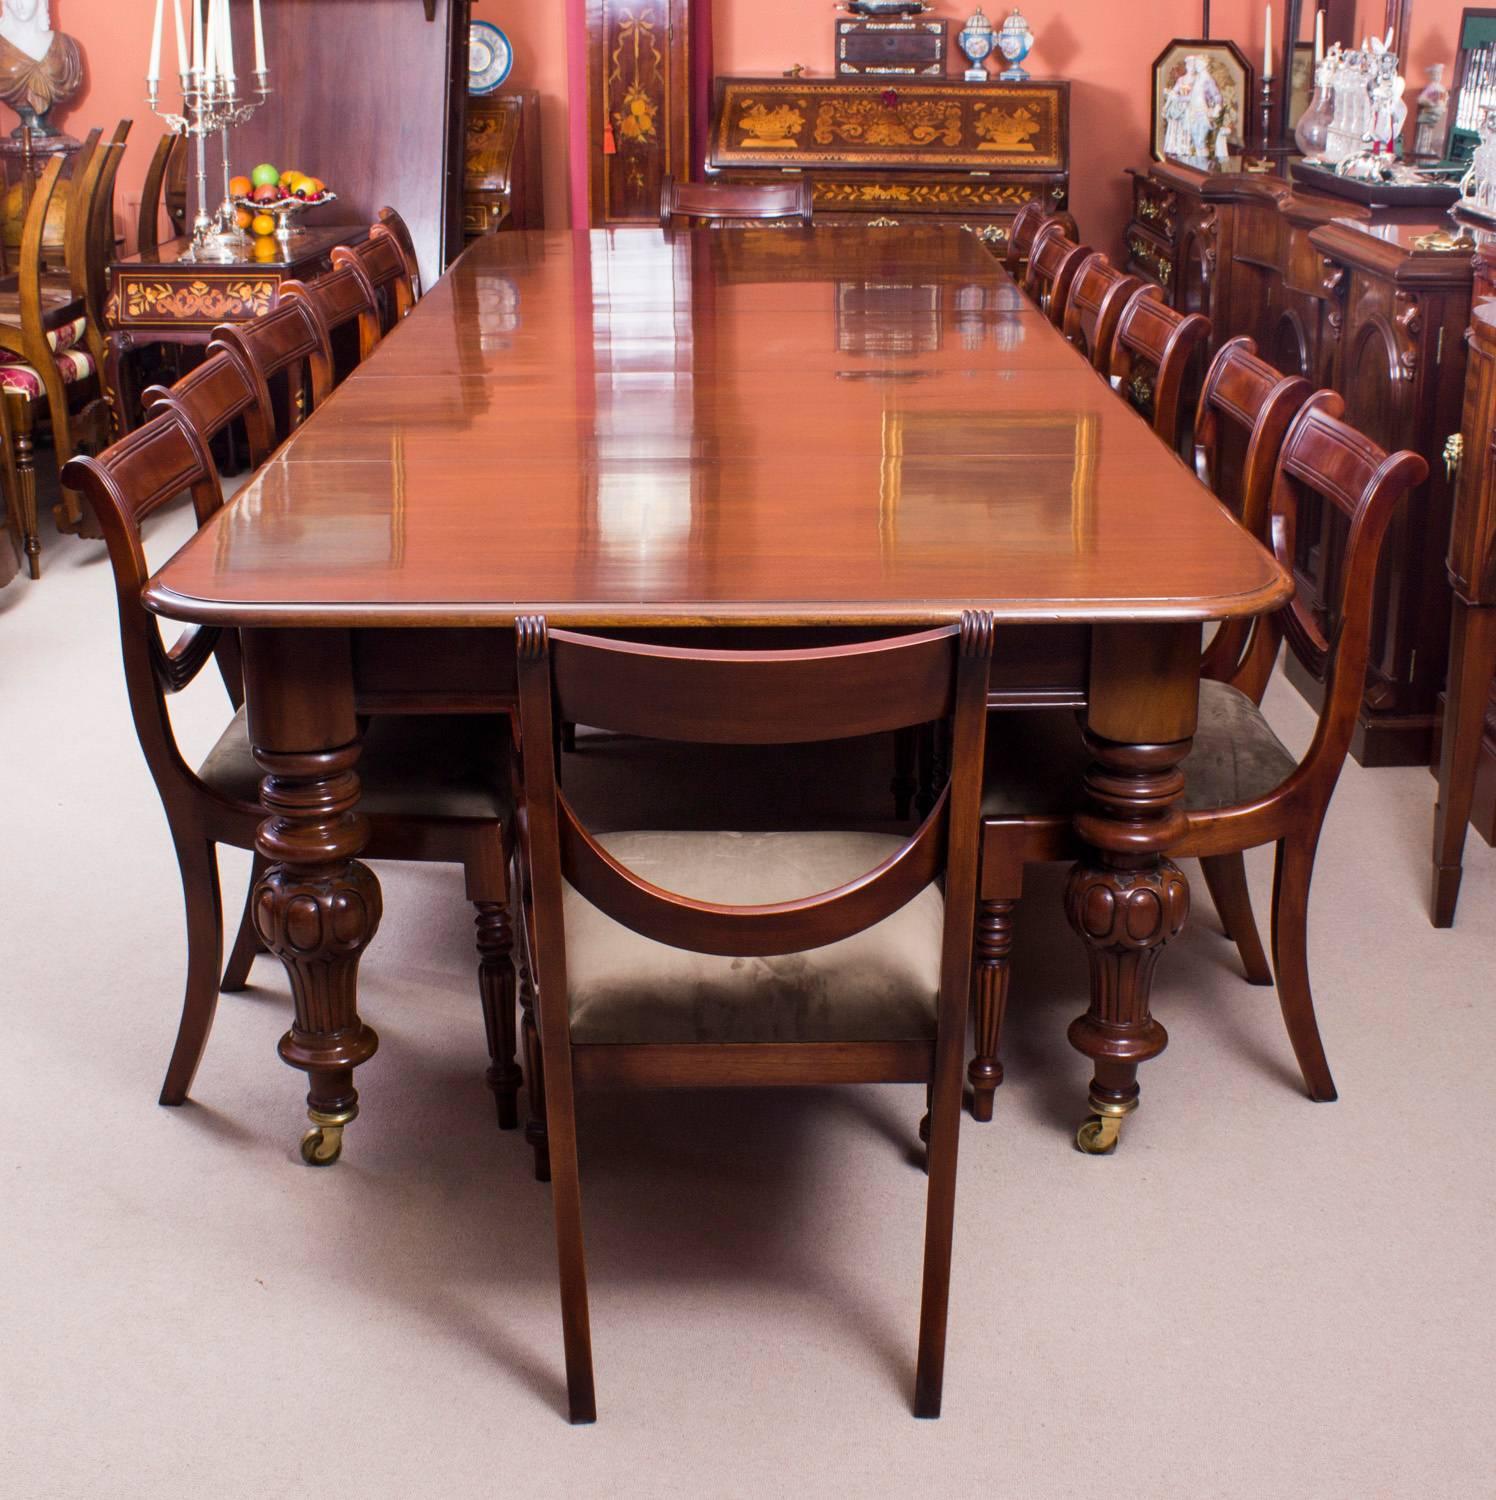 This is a beautiful flame mahogany Victorian antique dining table dating from the 1860s.

This amazing antique dining table can seat fourteen people in comfort and has been hand-crafted in solid flame mahogany which is renowned for its beautiful